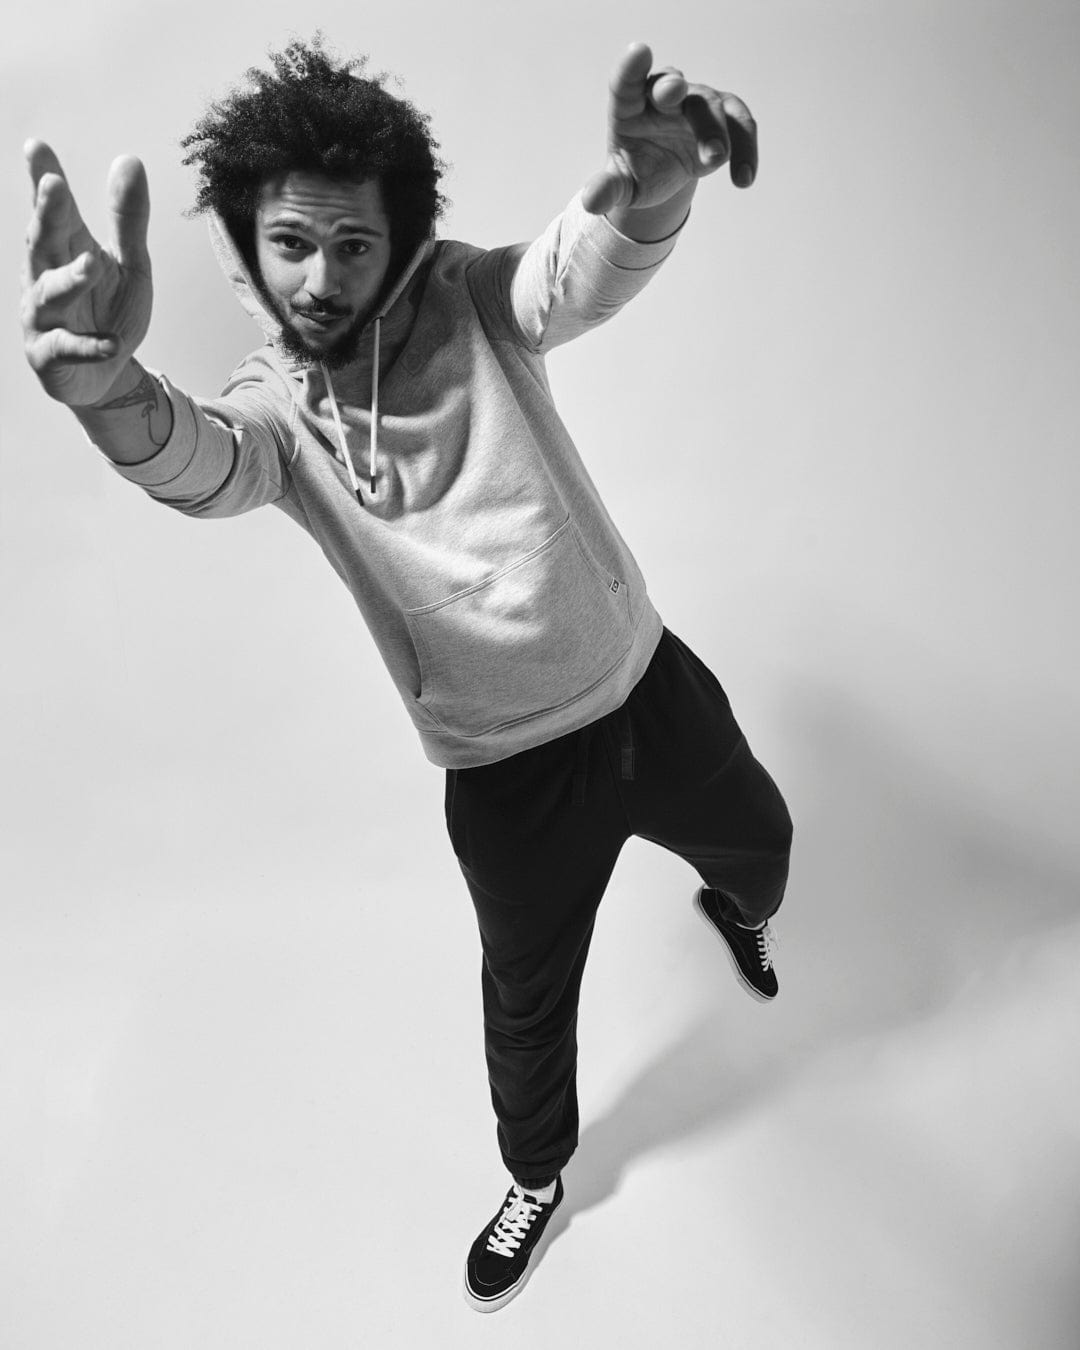 A black and white photo of a person in mid-jump, wearing a Saltrock Original - Mens Pop Hood - Blue Marl hoodie and sneakers made from soft jersey material, extending arms towards the camera with fingers pointed.